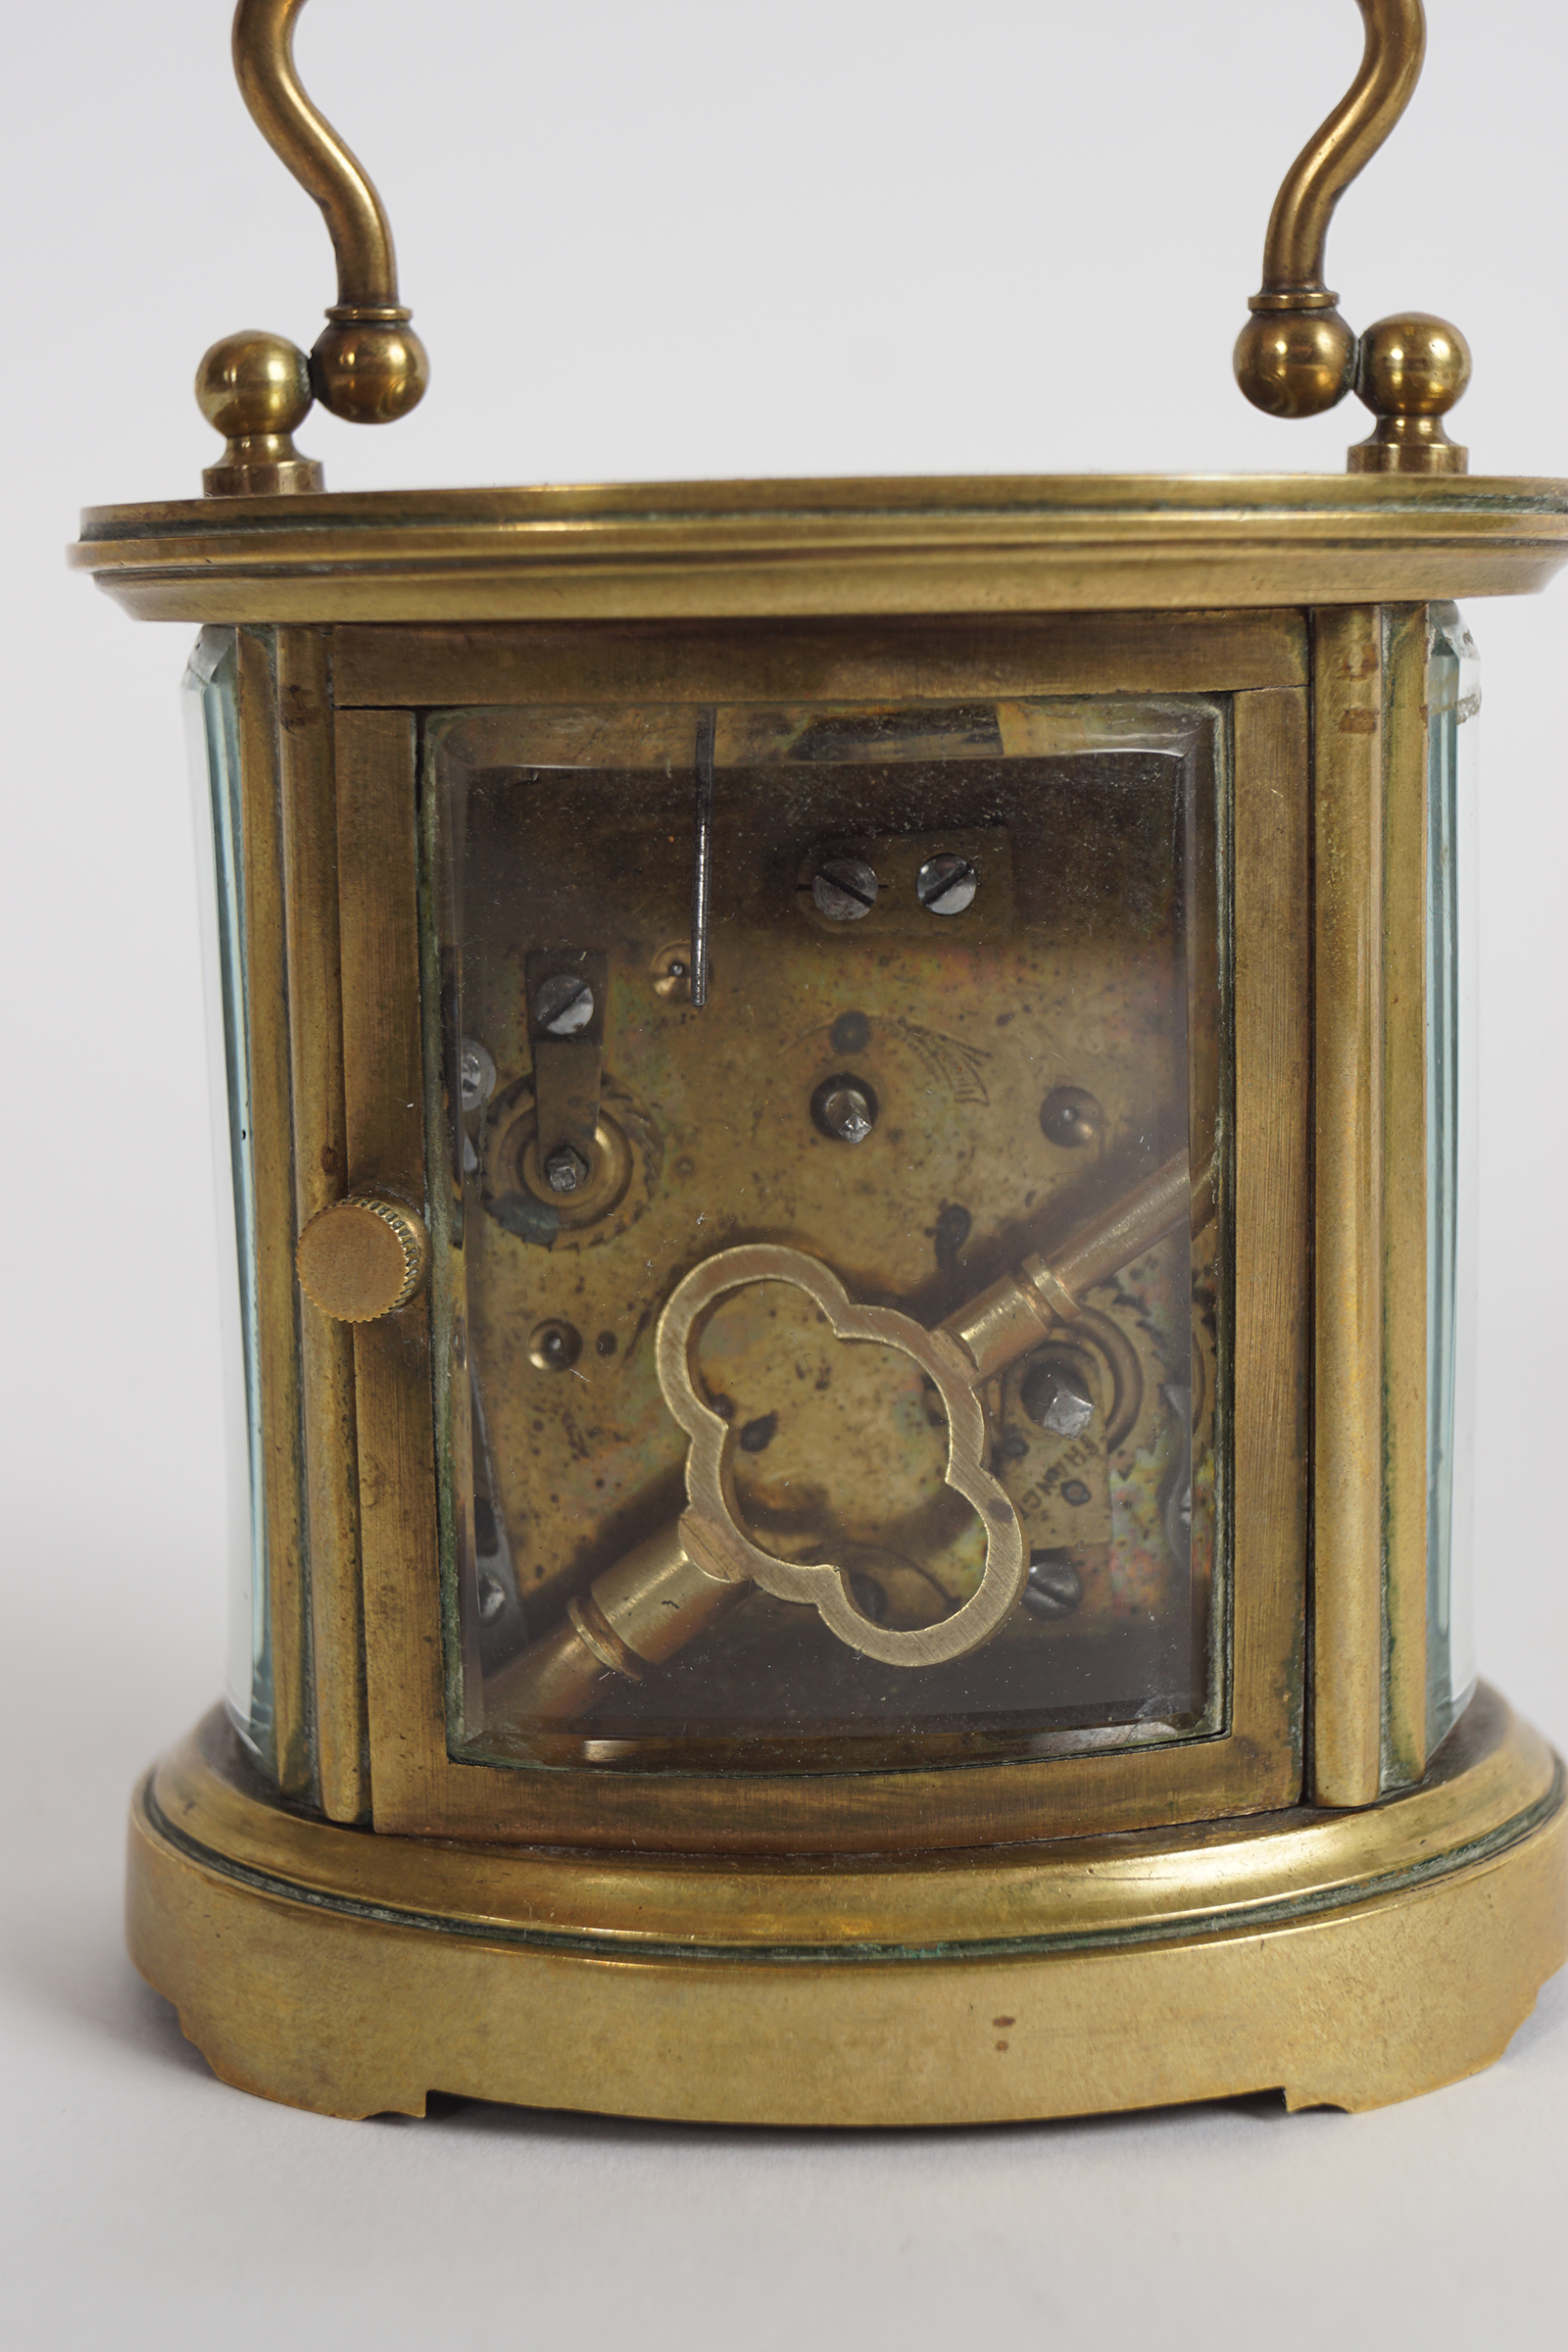 19TH-CENTURY BRASS CARRIAGE CLOCK - Image 4 of 4